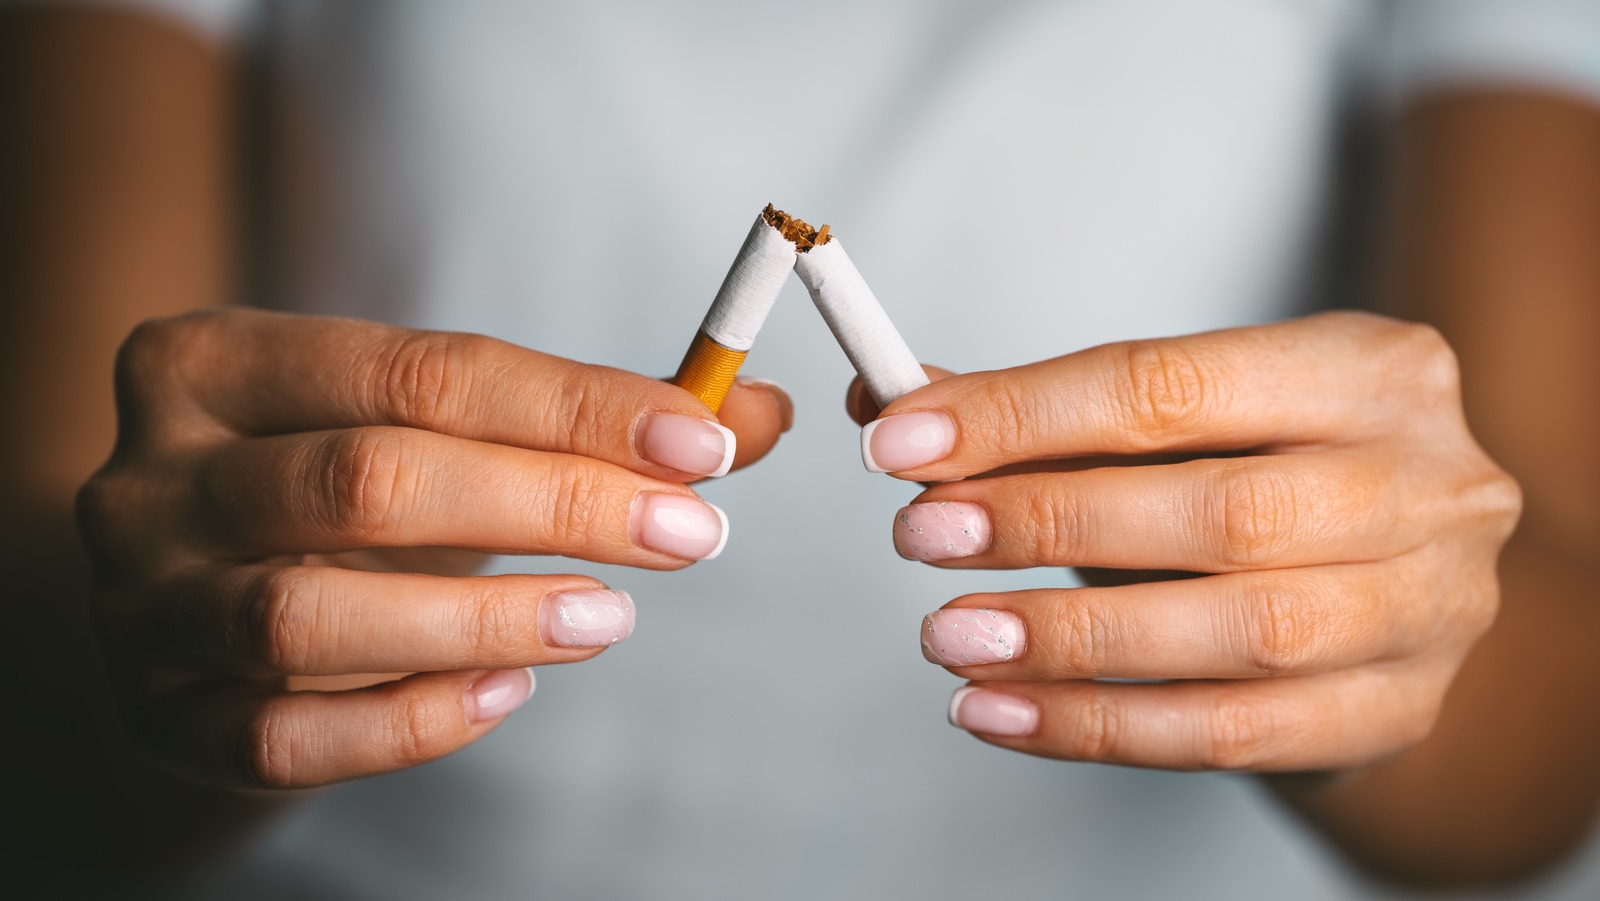 How Fast Does Nicotine Leave Your System